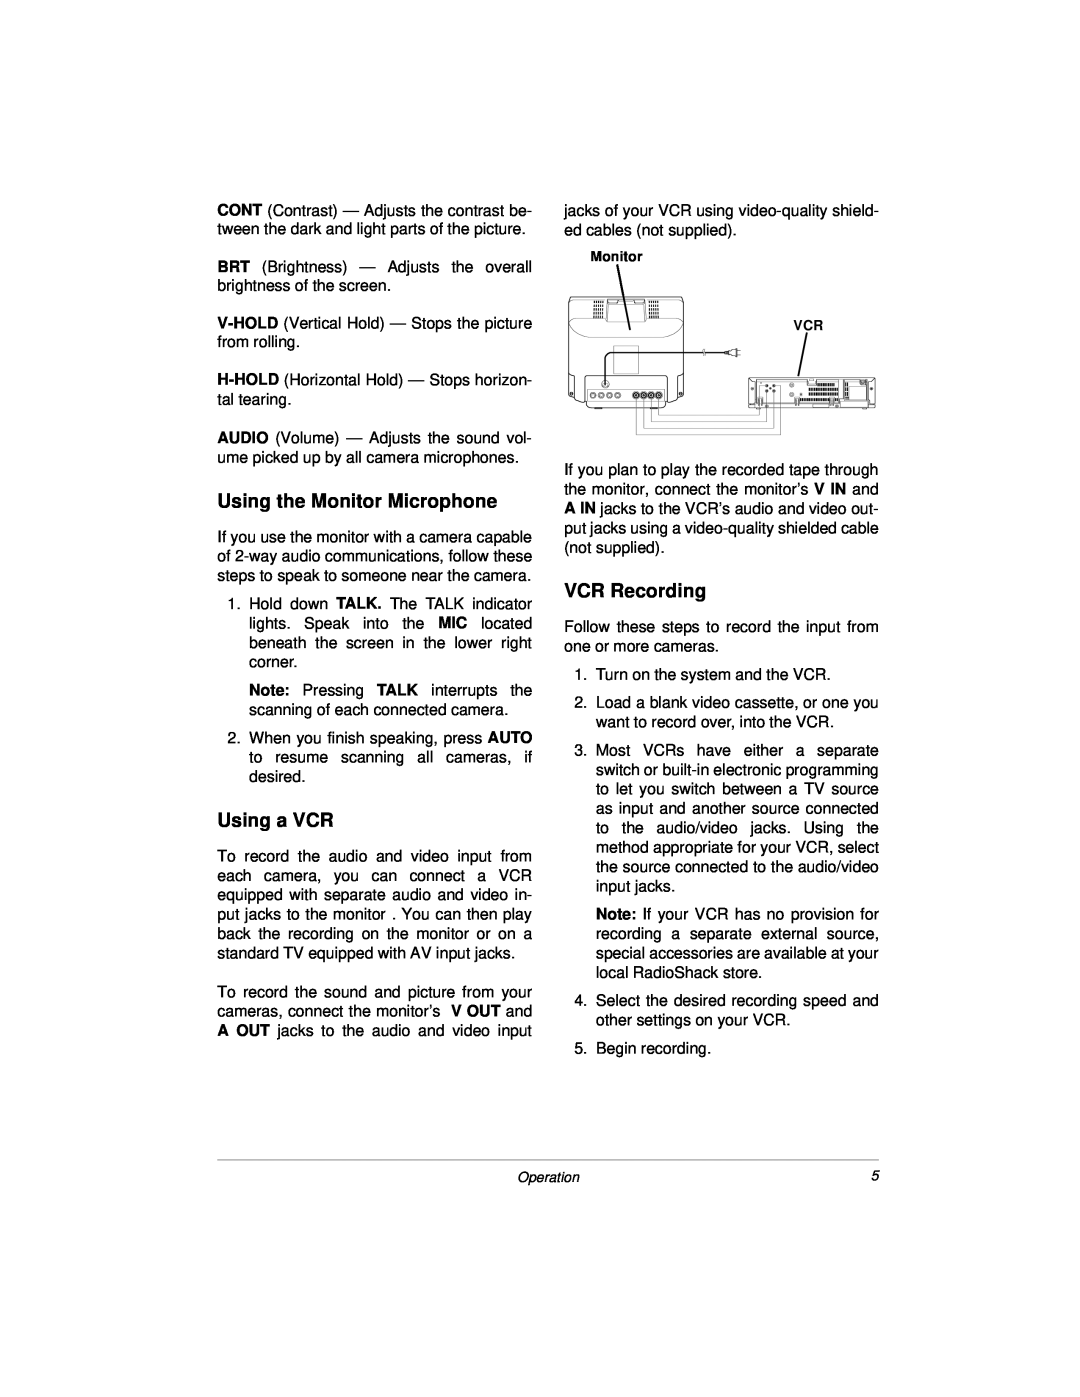 Radio Shack 49-2513, 49-2512 owner manual Using the Monitor Microphone, Using a VCR, VCR Recording 